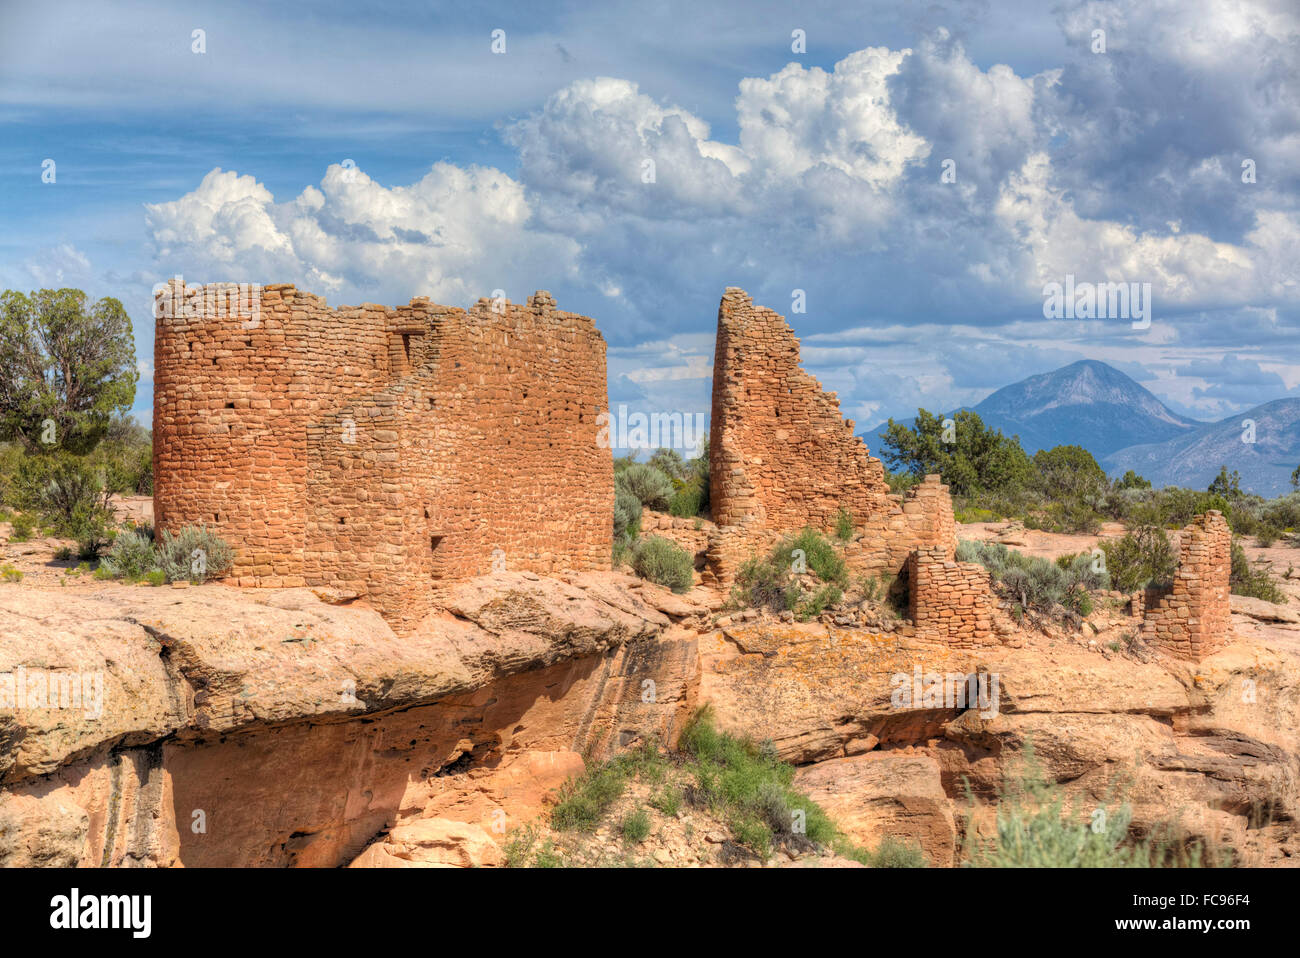 Château de Hovenweep, Square Tower Group, Ruines Anasazi, datant de1230 à 1275 AD, Hovenweep National Monument, Utah, USA Banque D'Images